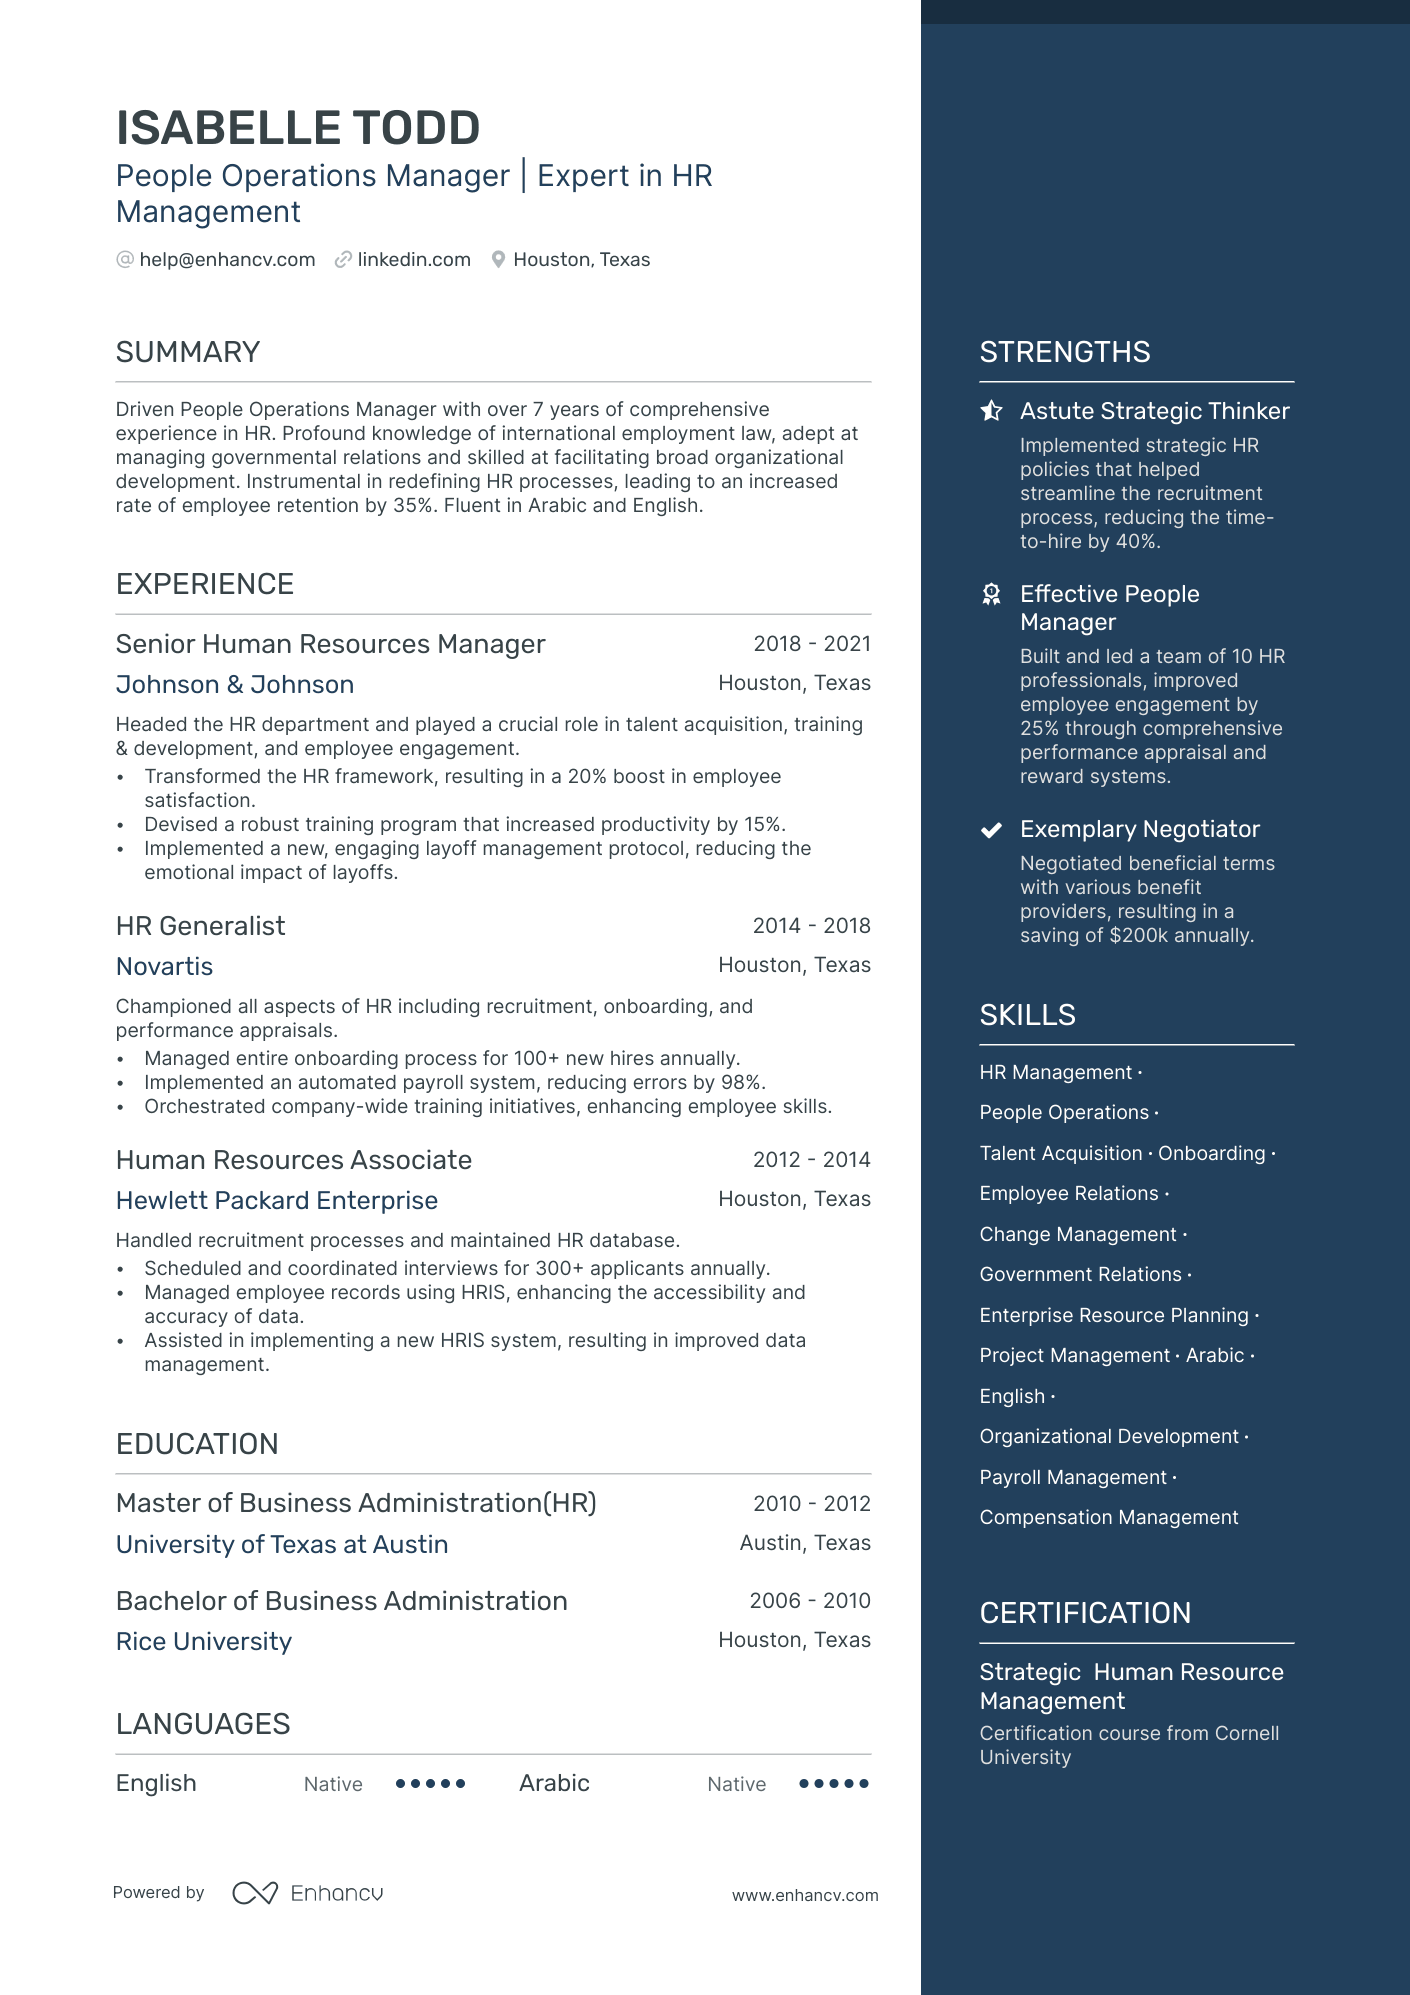 People Operations Manager resume example